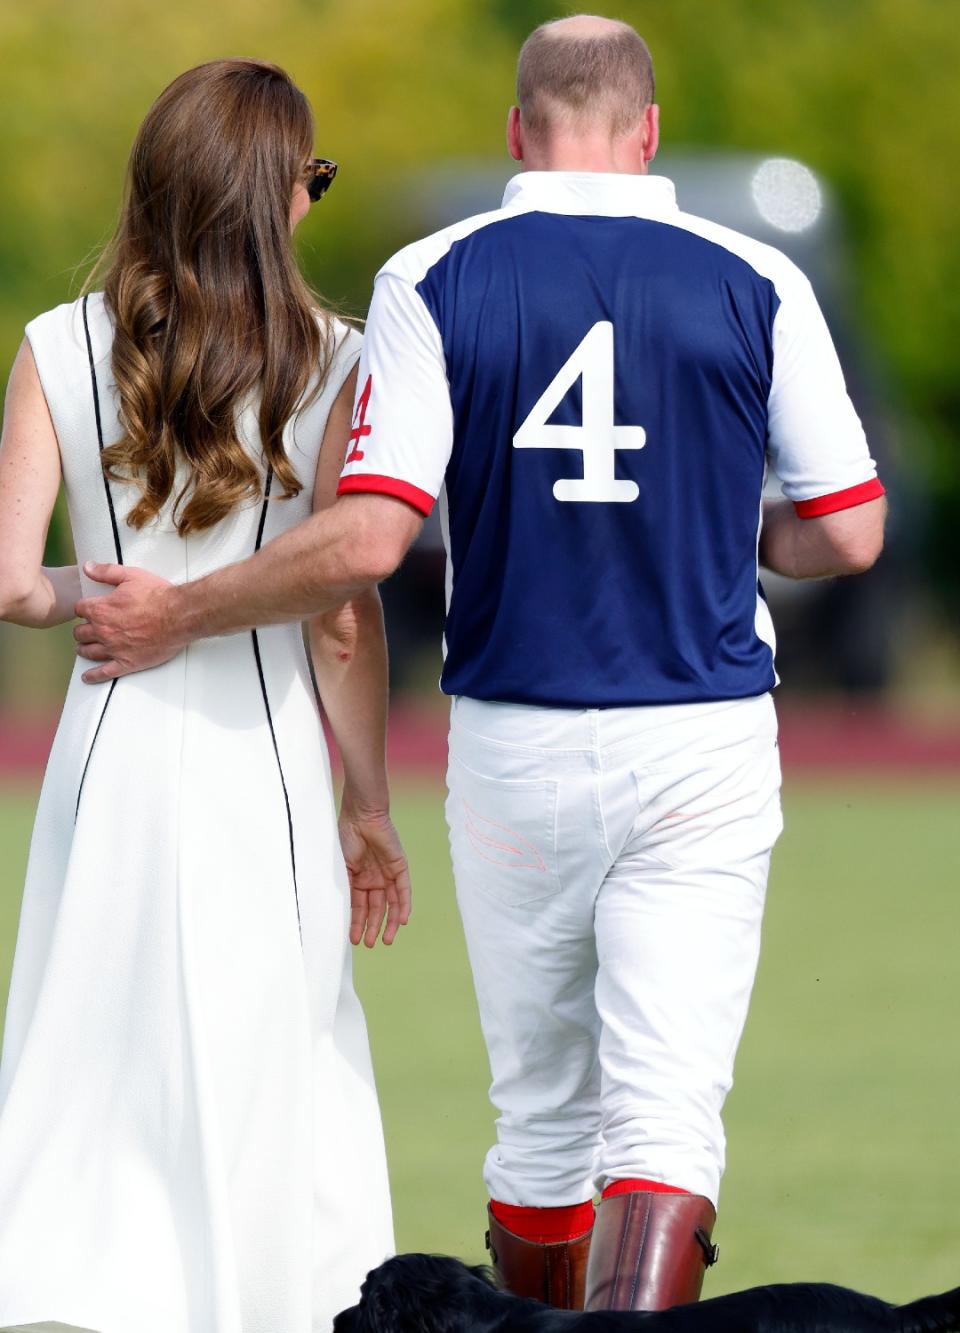 A protective arm at the Polo